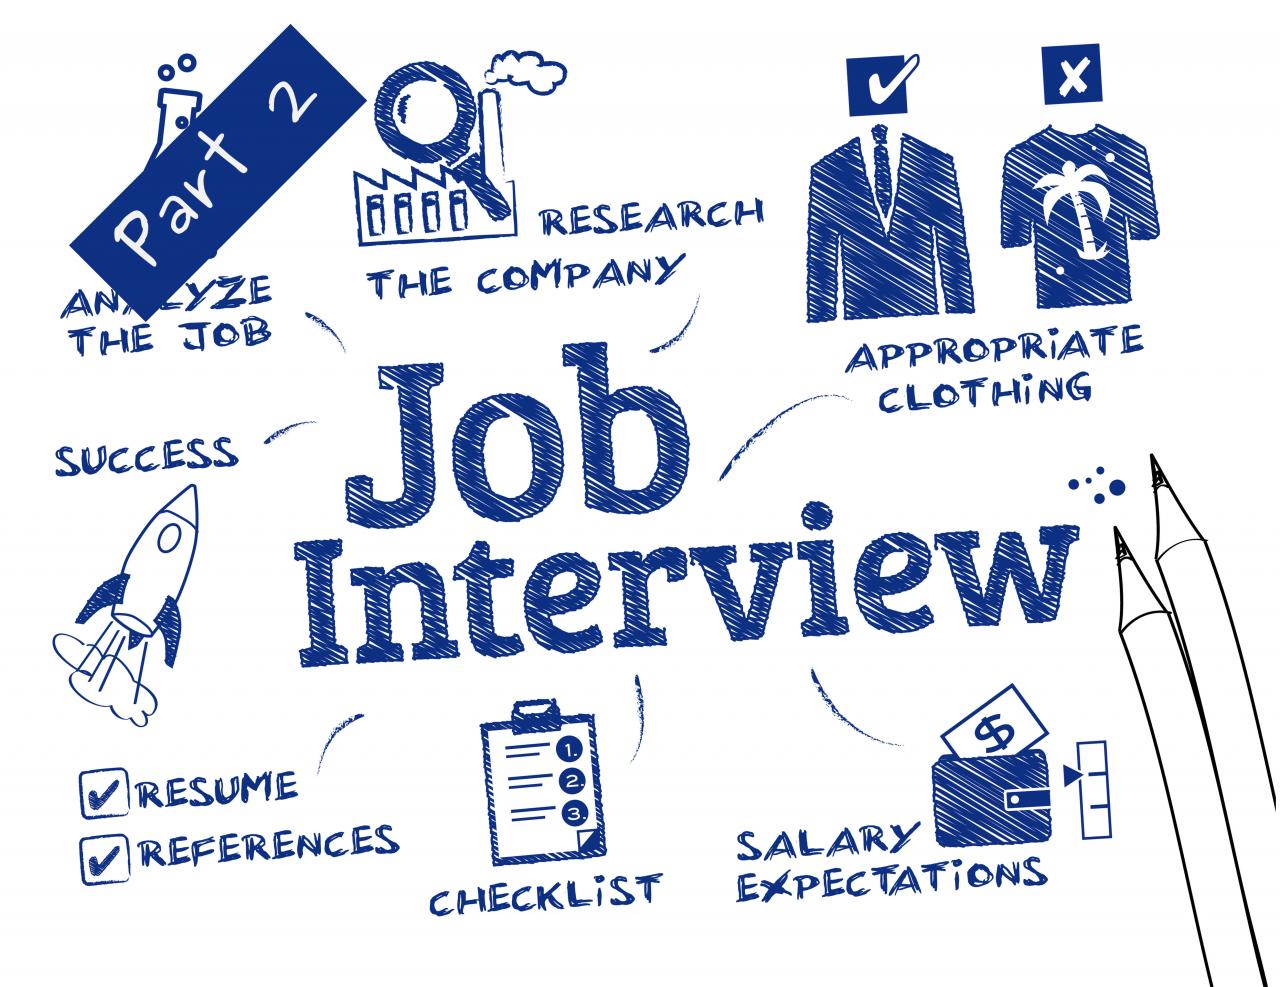 Tips to get the job at an interview